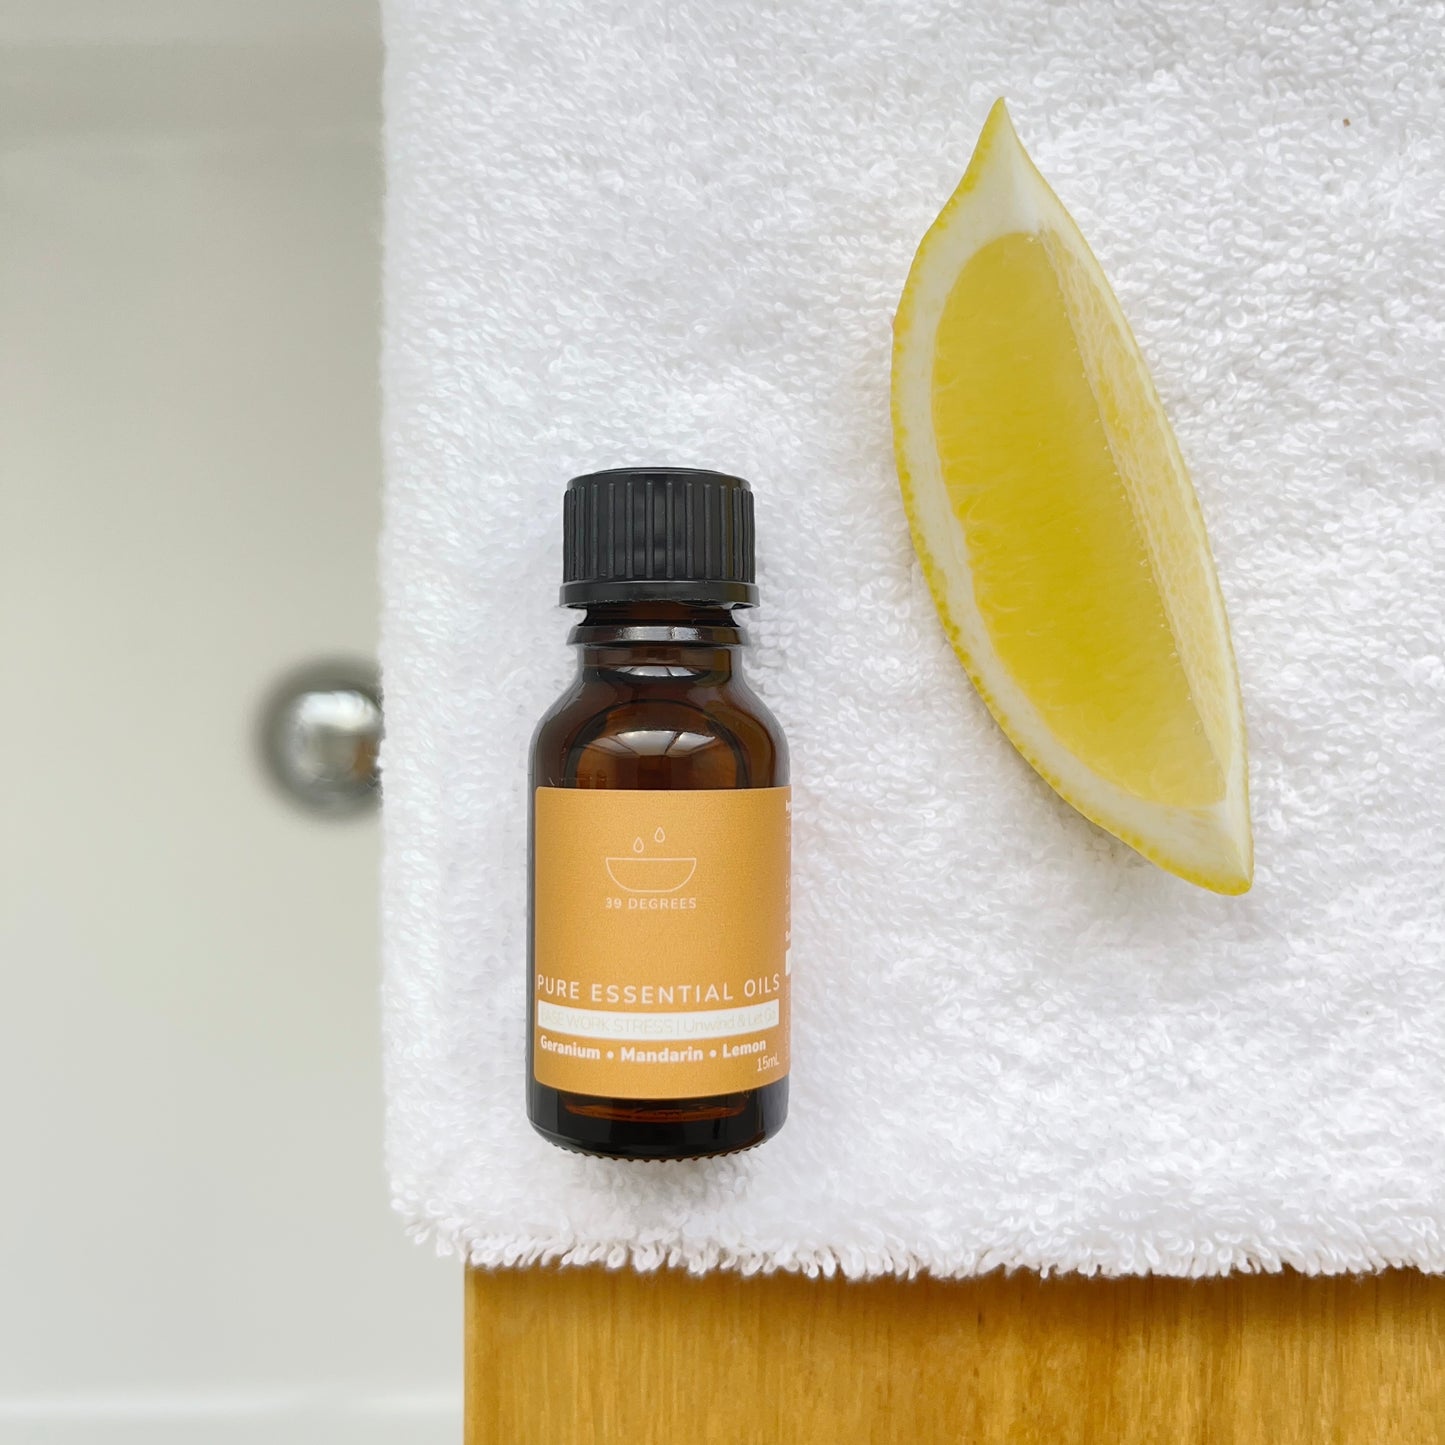 15 mL Essential Oil To Match Your Tonic